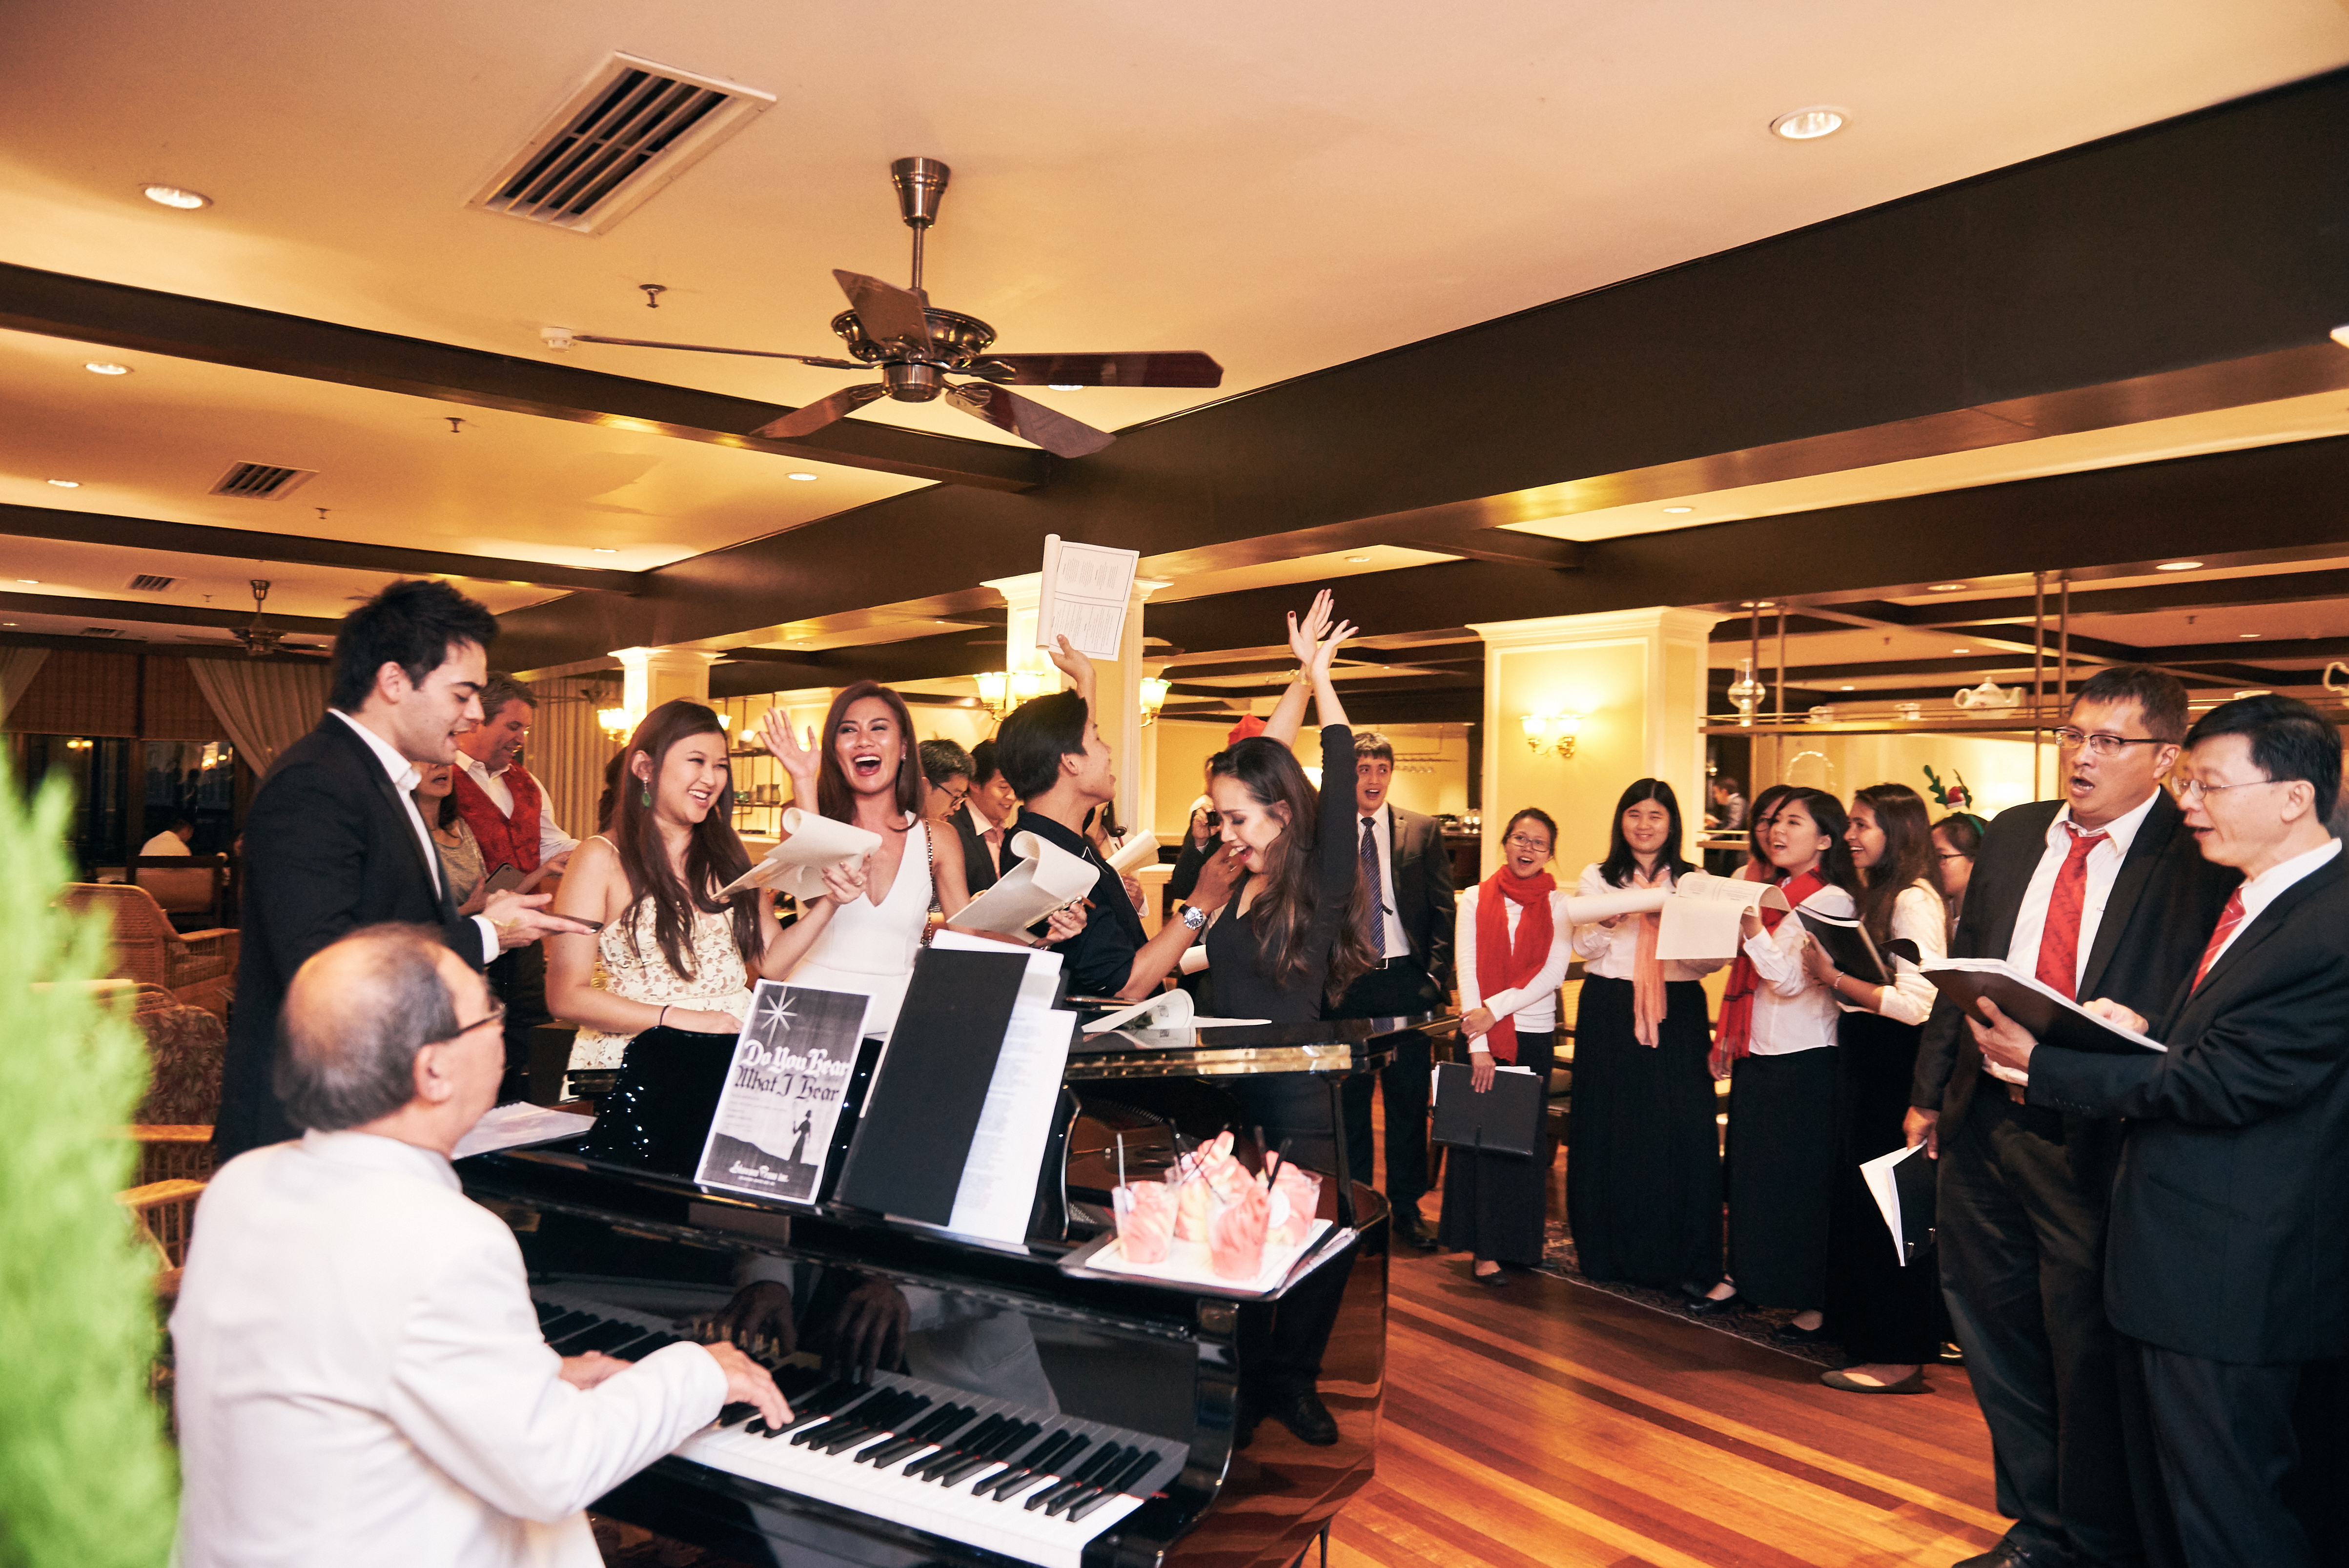 carolling-with-resident-pianist-affectionately-known-as-uncle-steven-at-cameron-highlands-resort-2